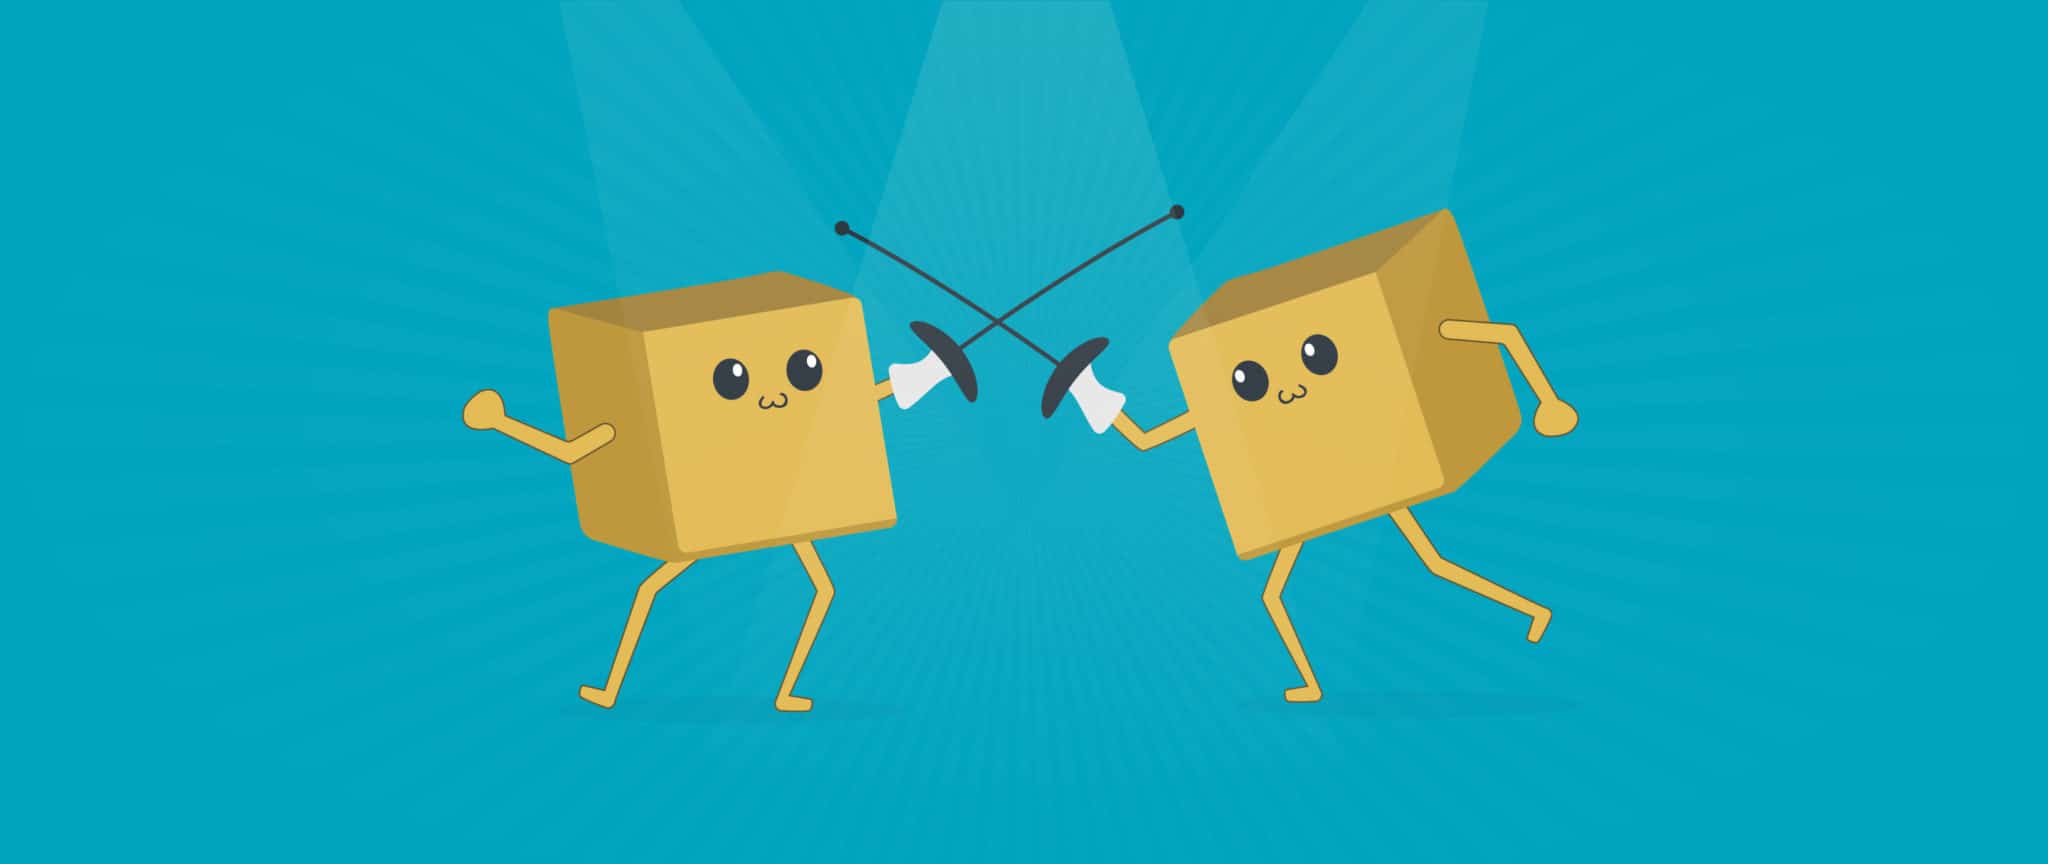 Two boxes, representing customer acquisition and customer retention, engage in a fencing match.